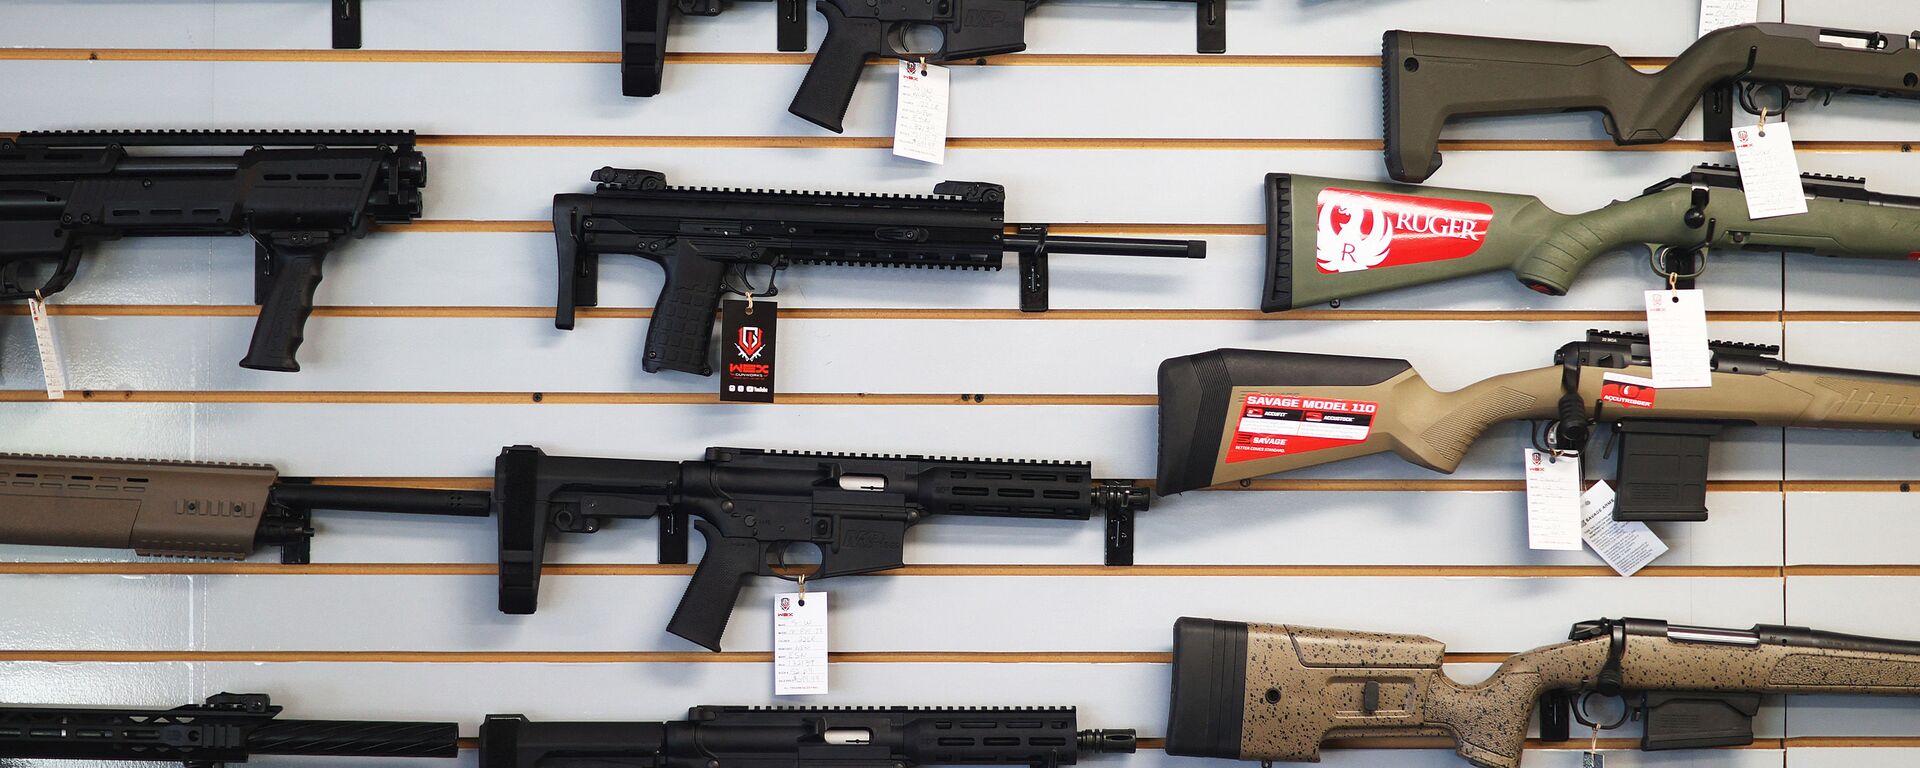 DELRAY BEACH, FLORIDA - MARCH 24: Weapons for sale hang on the wall at WEX Gunworks on March 24, 2021 in Delray Beach, Florida. U.S. President Joe Biden has called on lawmakers to “immediately pass” legislation to help curb gun violence in the county.   - Sputnik International, 1920, 11.04.2021